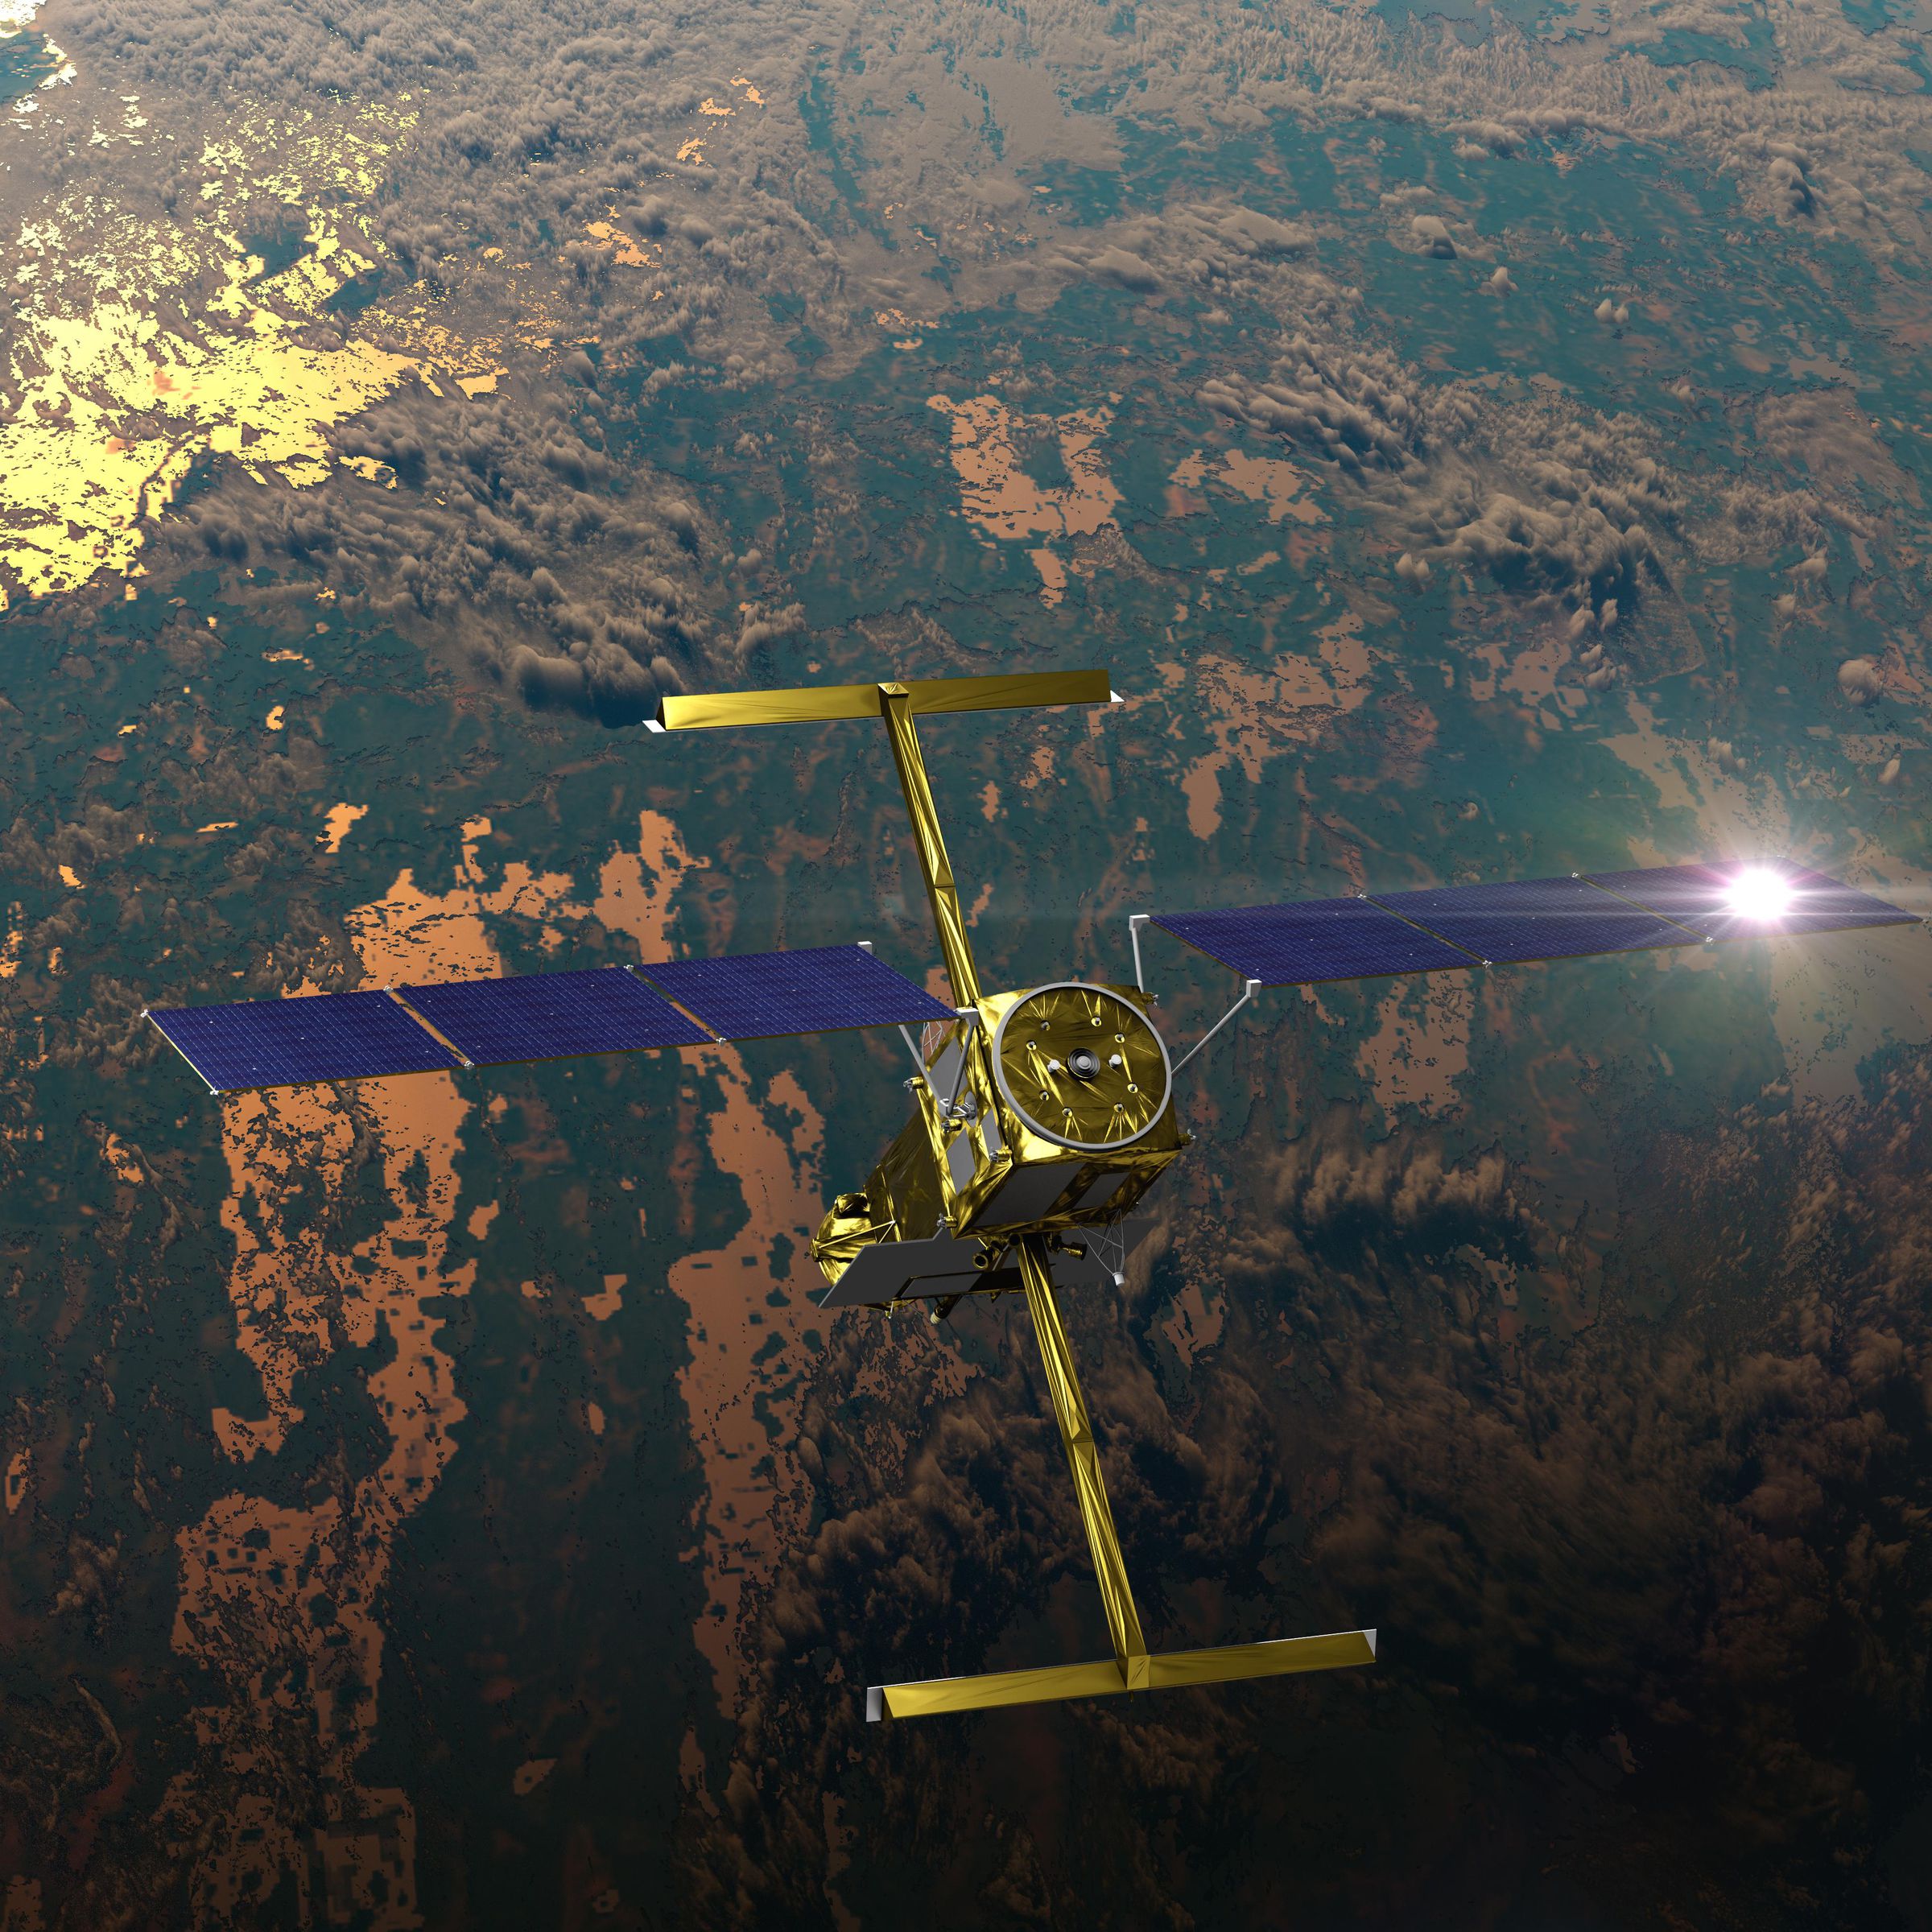 A gold satellite soars above Earth. Below, the sun glints off a body of water. Some clouds dot the sky beneath the satellite.